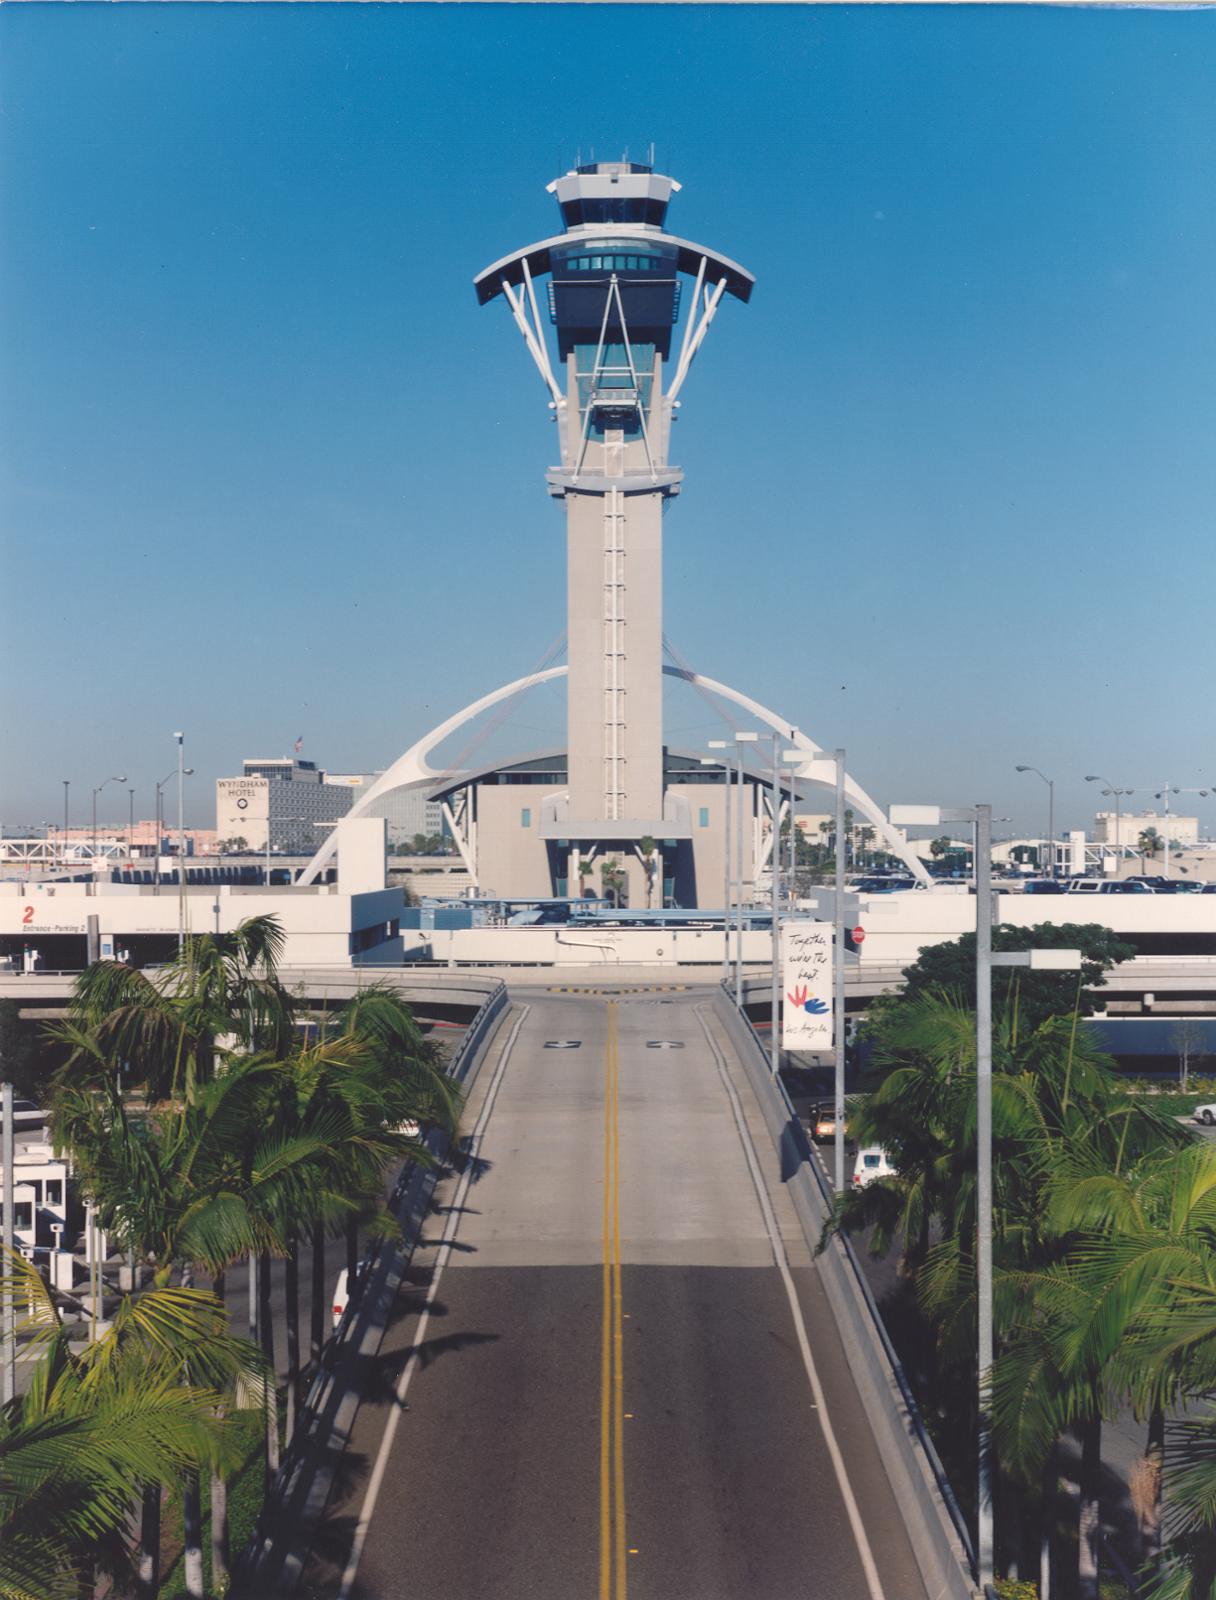 Control tower photo